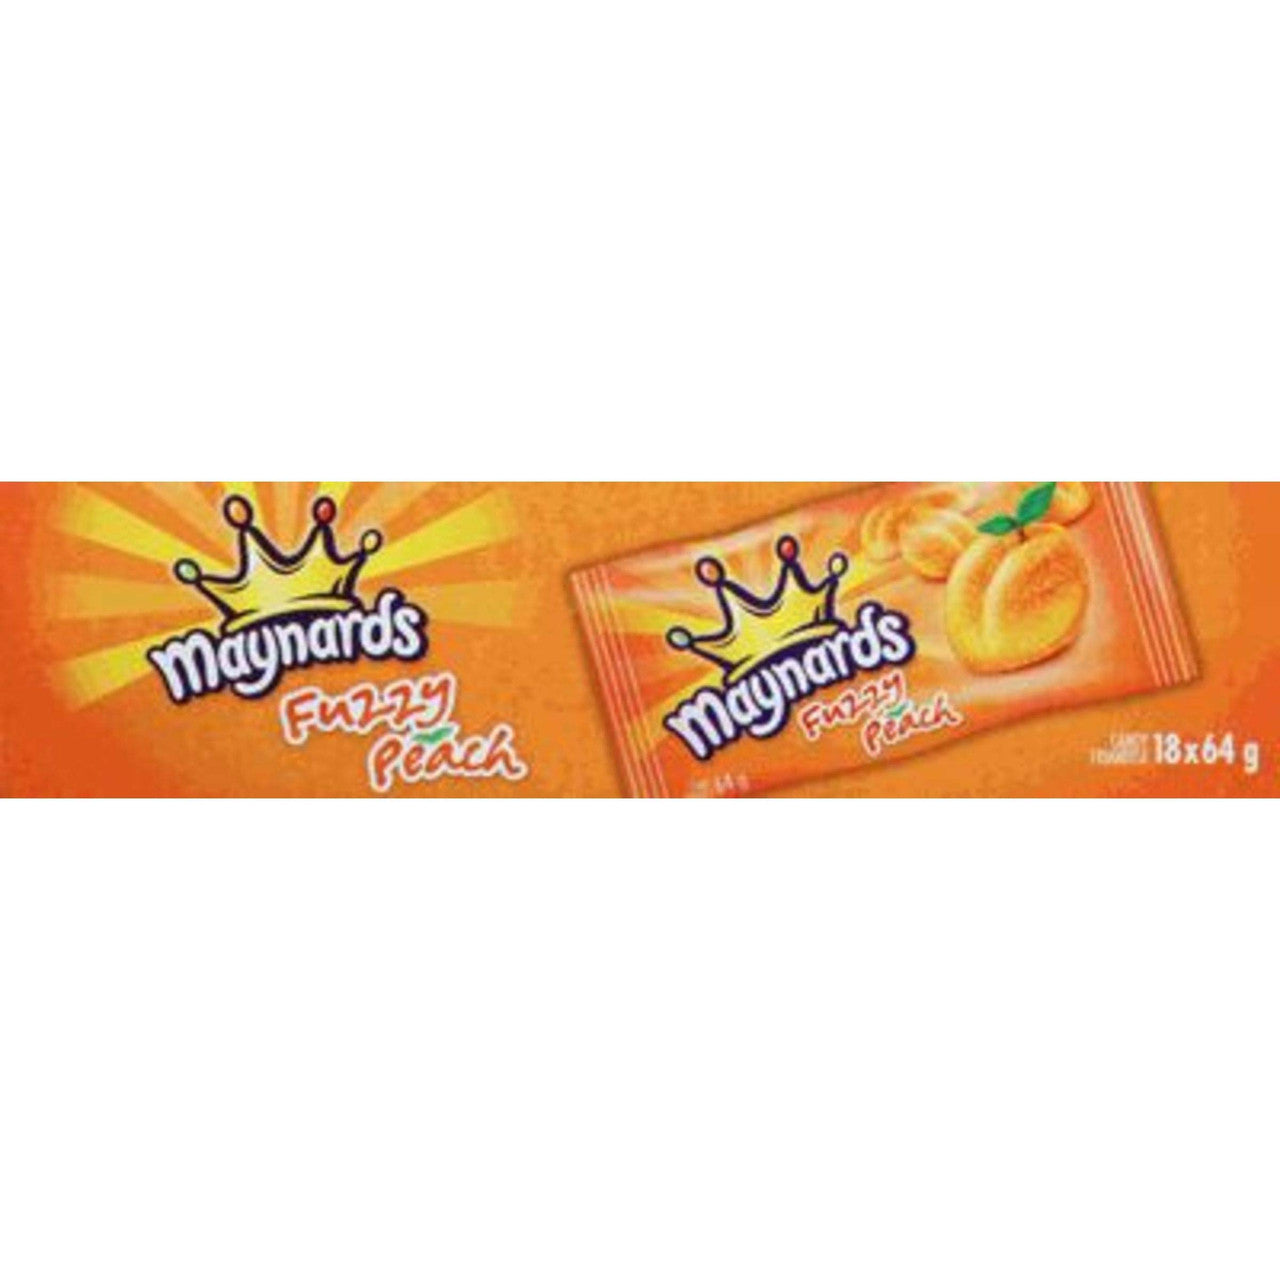 Maynards Fuzzy Peach Candy, 64g (Pack of 18) (Imported from Canada)